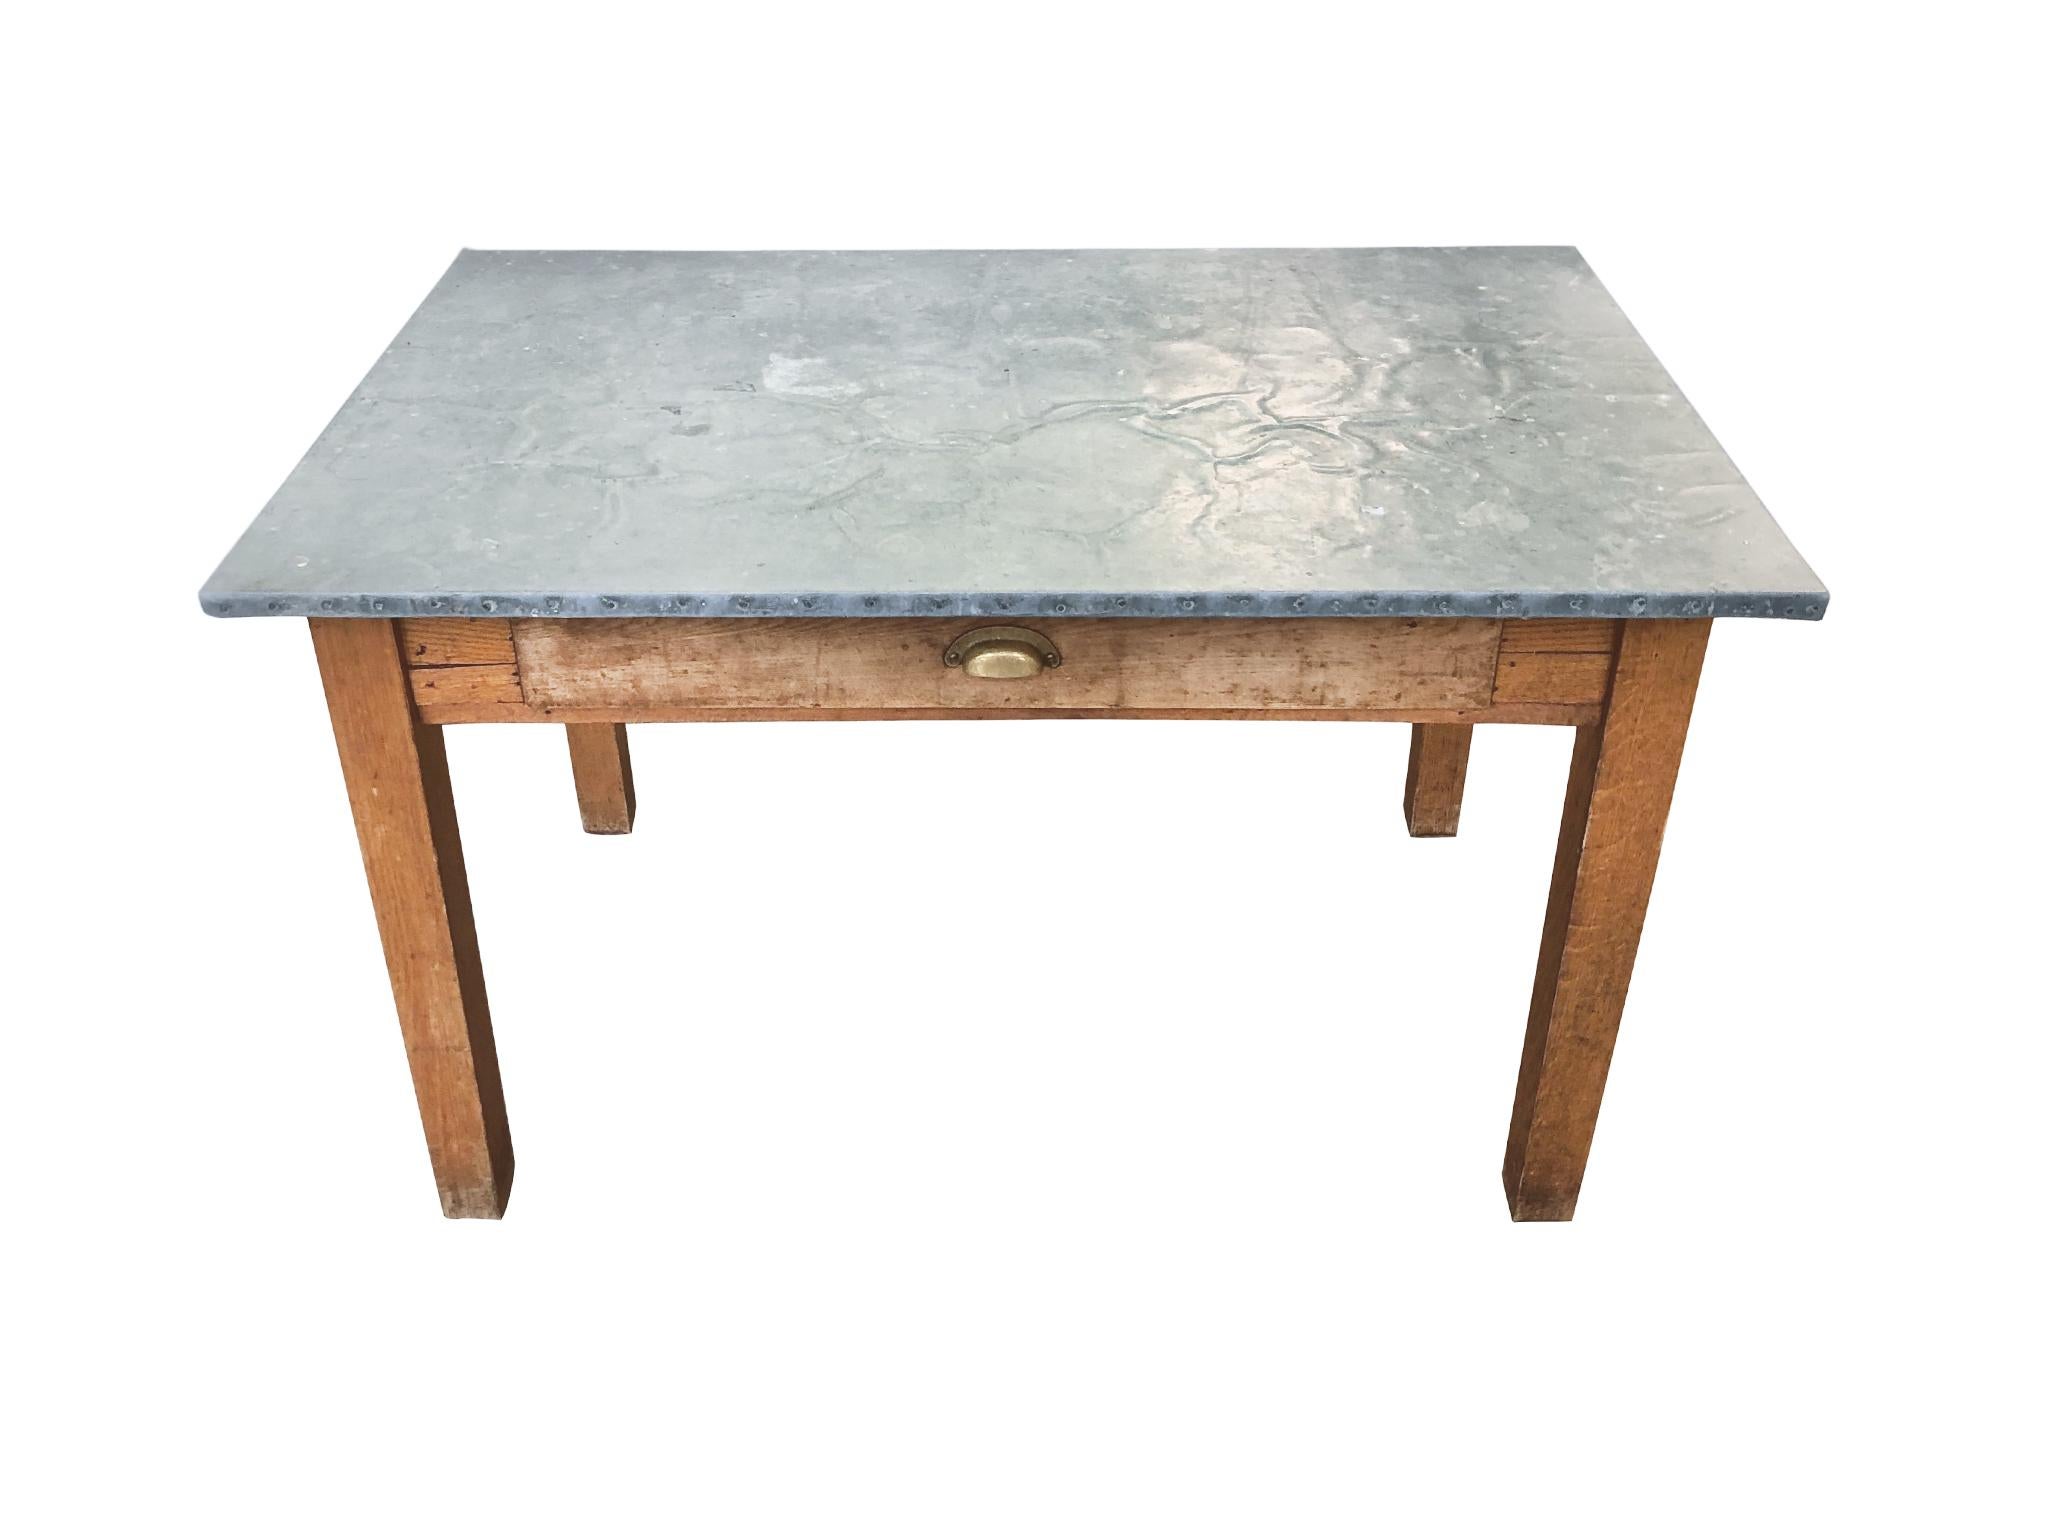 A 20th century modestly sized table that can be used as a dining table, work table, or desk. Handmade, 1930s-1940s. The table is comprised of a zinc-wrapped top and pine base with a single drawer. The zinc and pine have aged beautifully. They've